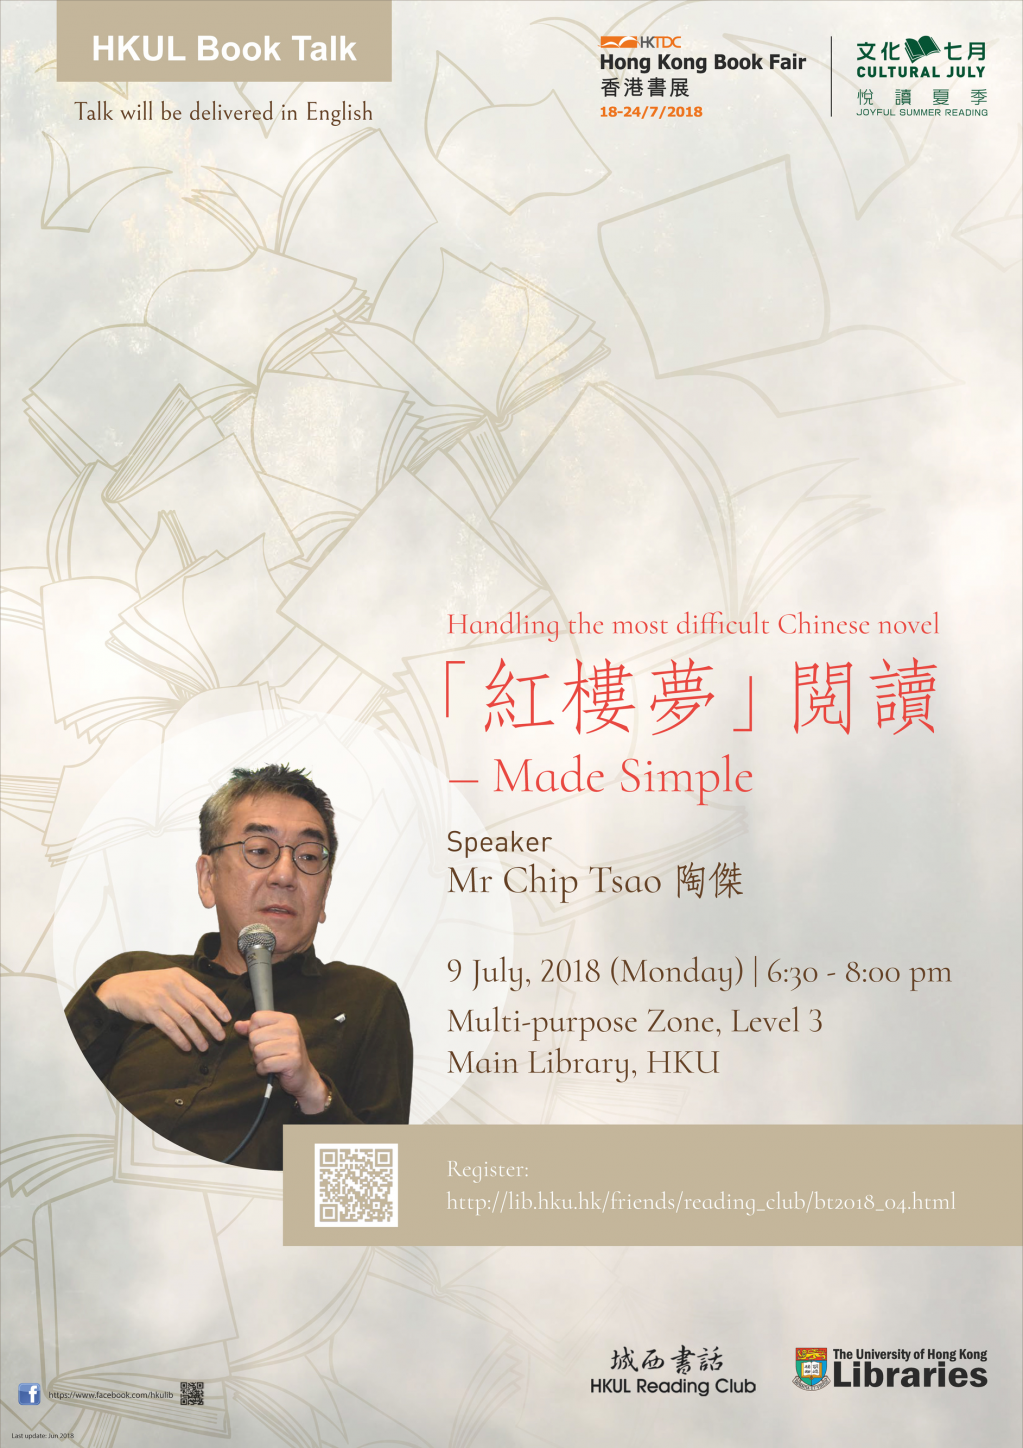 Chip Tsao Book Talk: Handling the most difficult Chinese novel 「紅樓夢」閲讀 - Made Simple